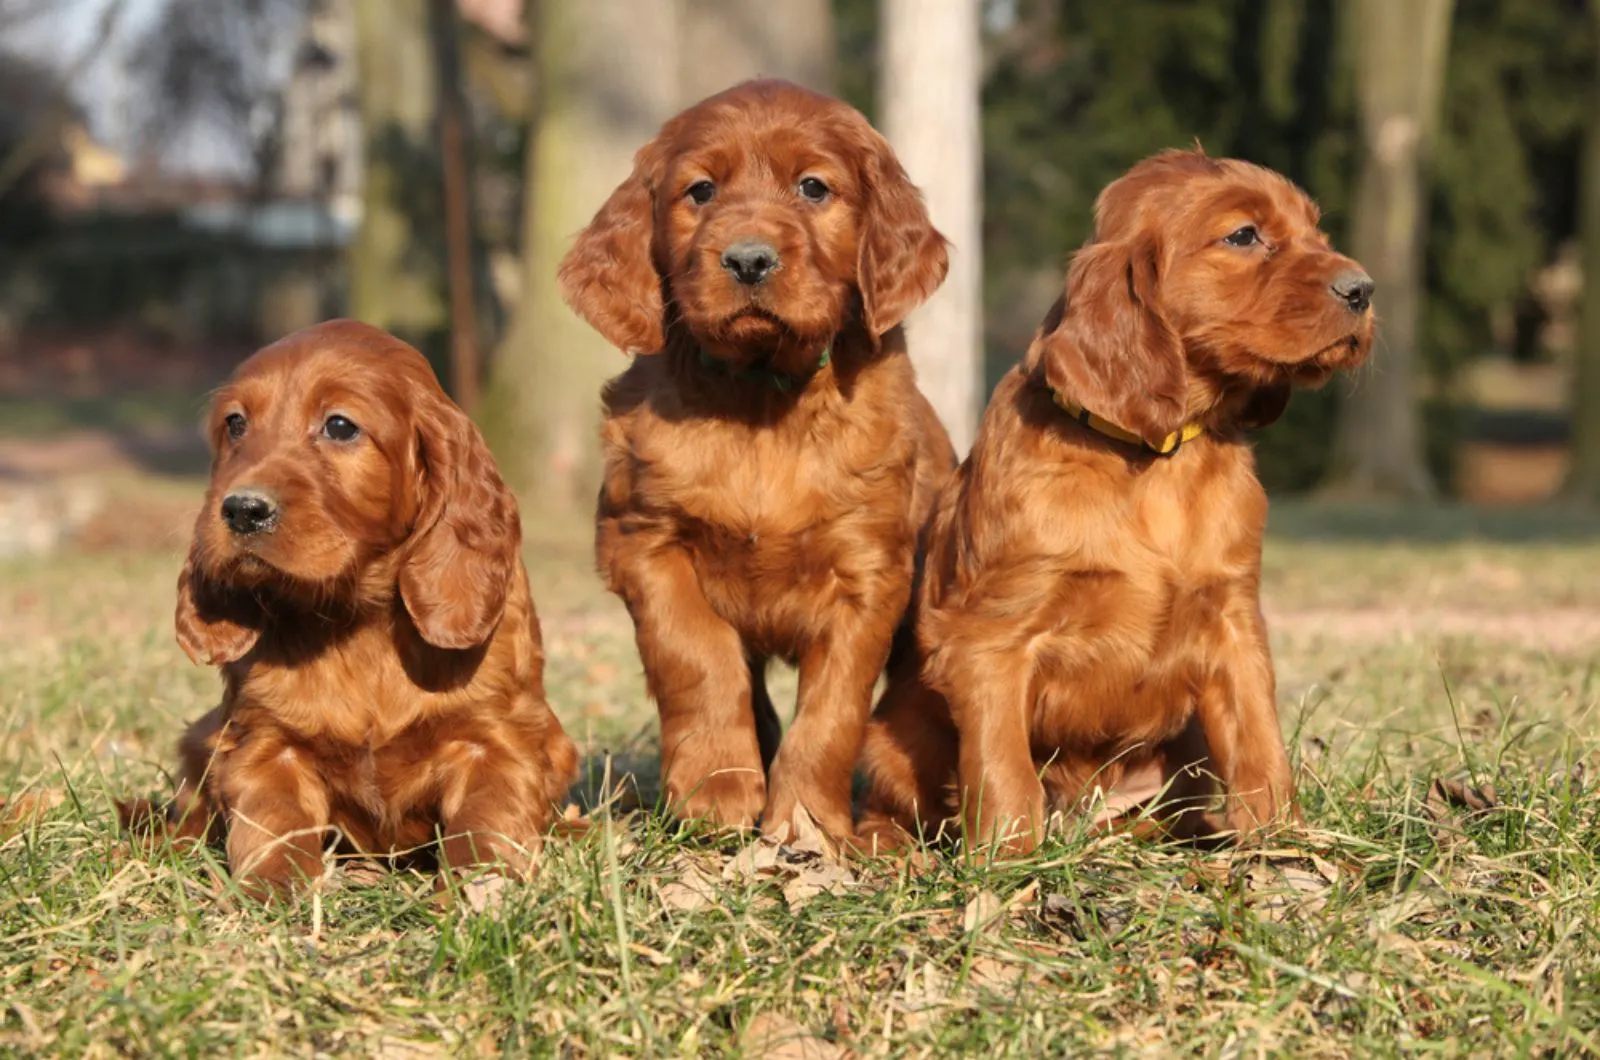 irish setter puppies sitting together on the grass